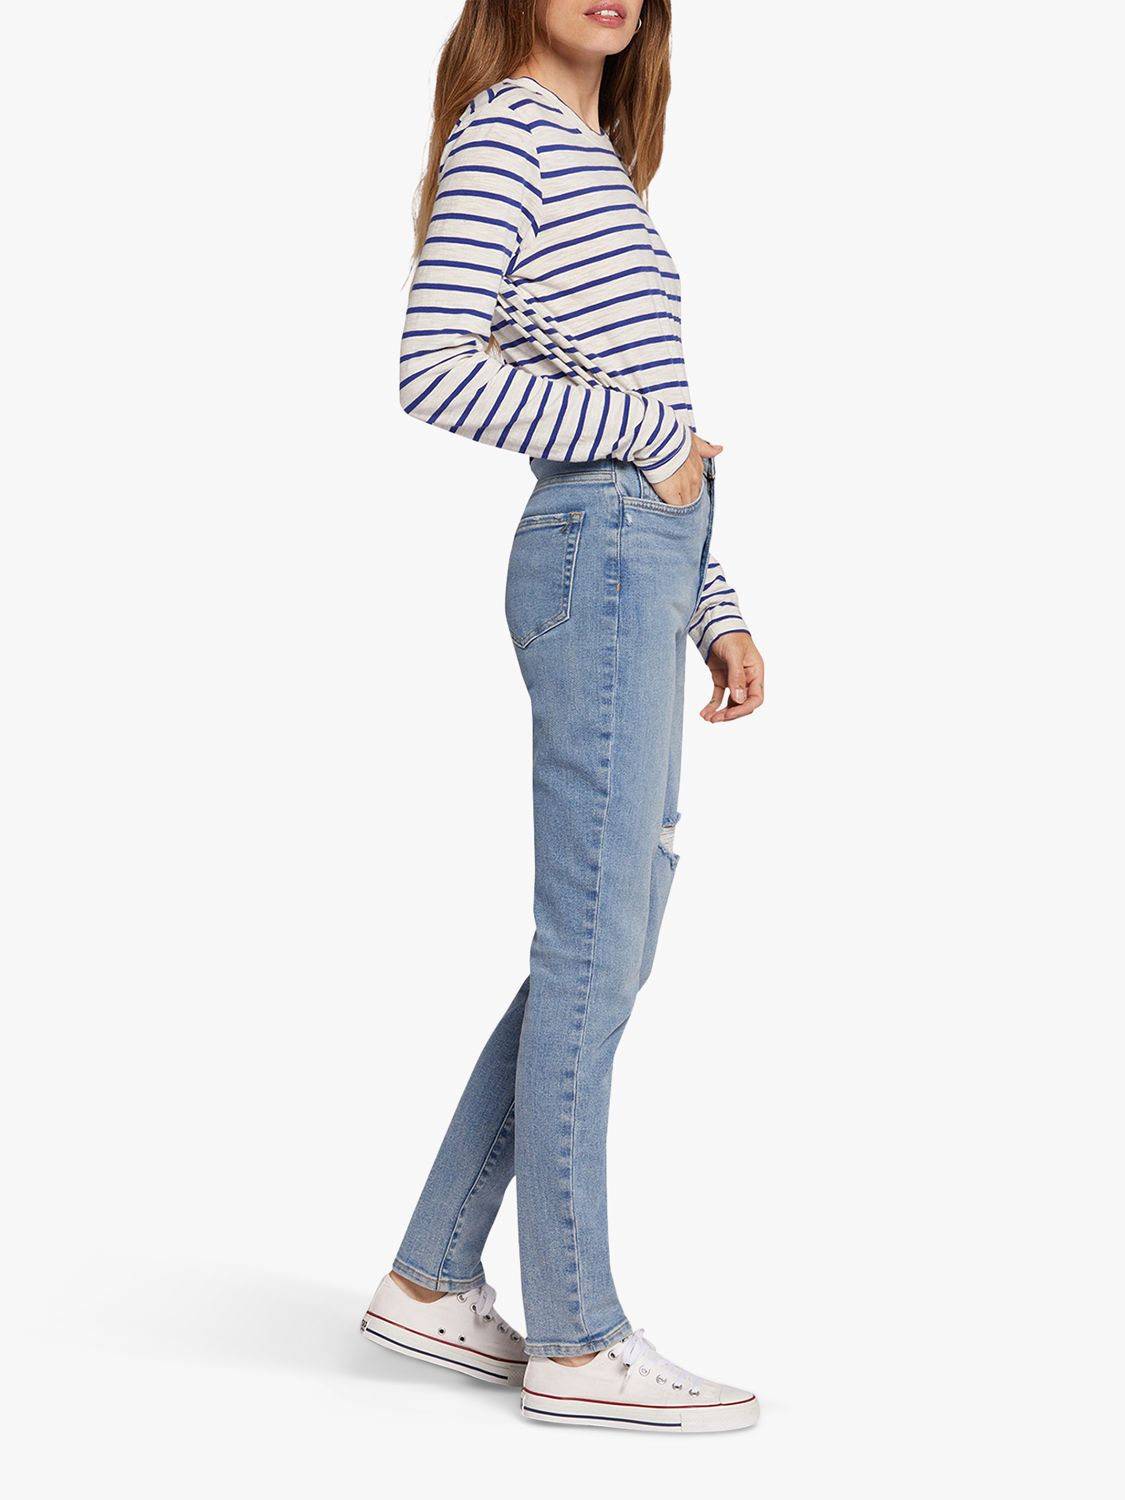 Buy Current/Elliott The Freeway High Rise Distressed Cigarette Jeans, Camino Light Blue Online at johnlewis.com